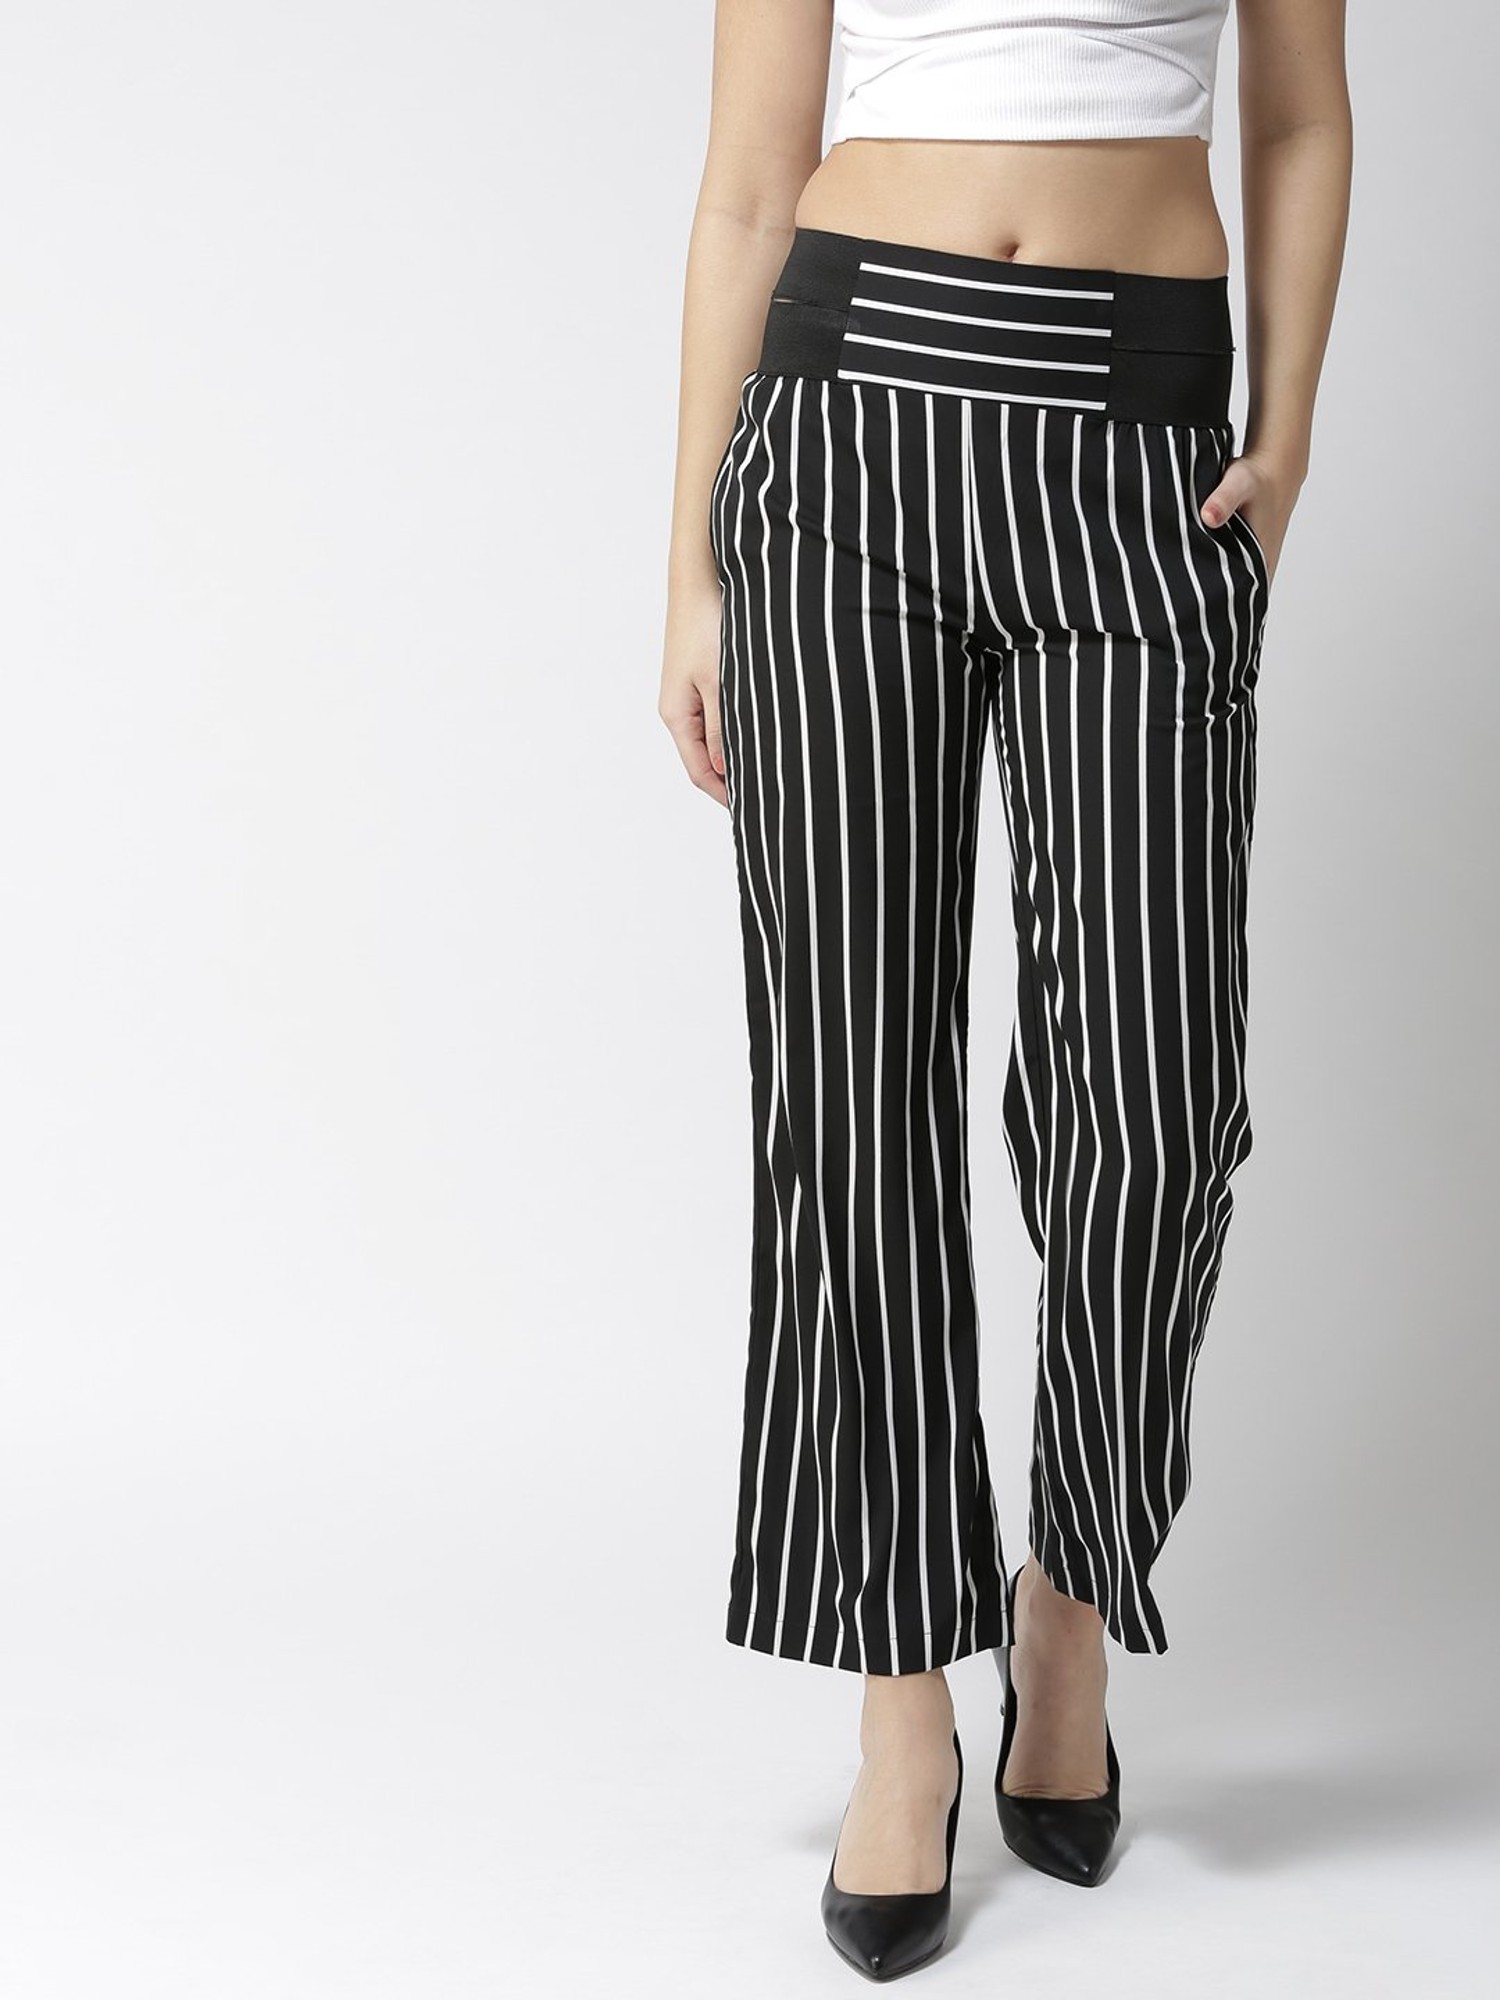 Shop Striped Straight Pants for Women from latest collection at Forever 21   568020